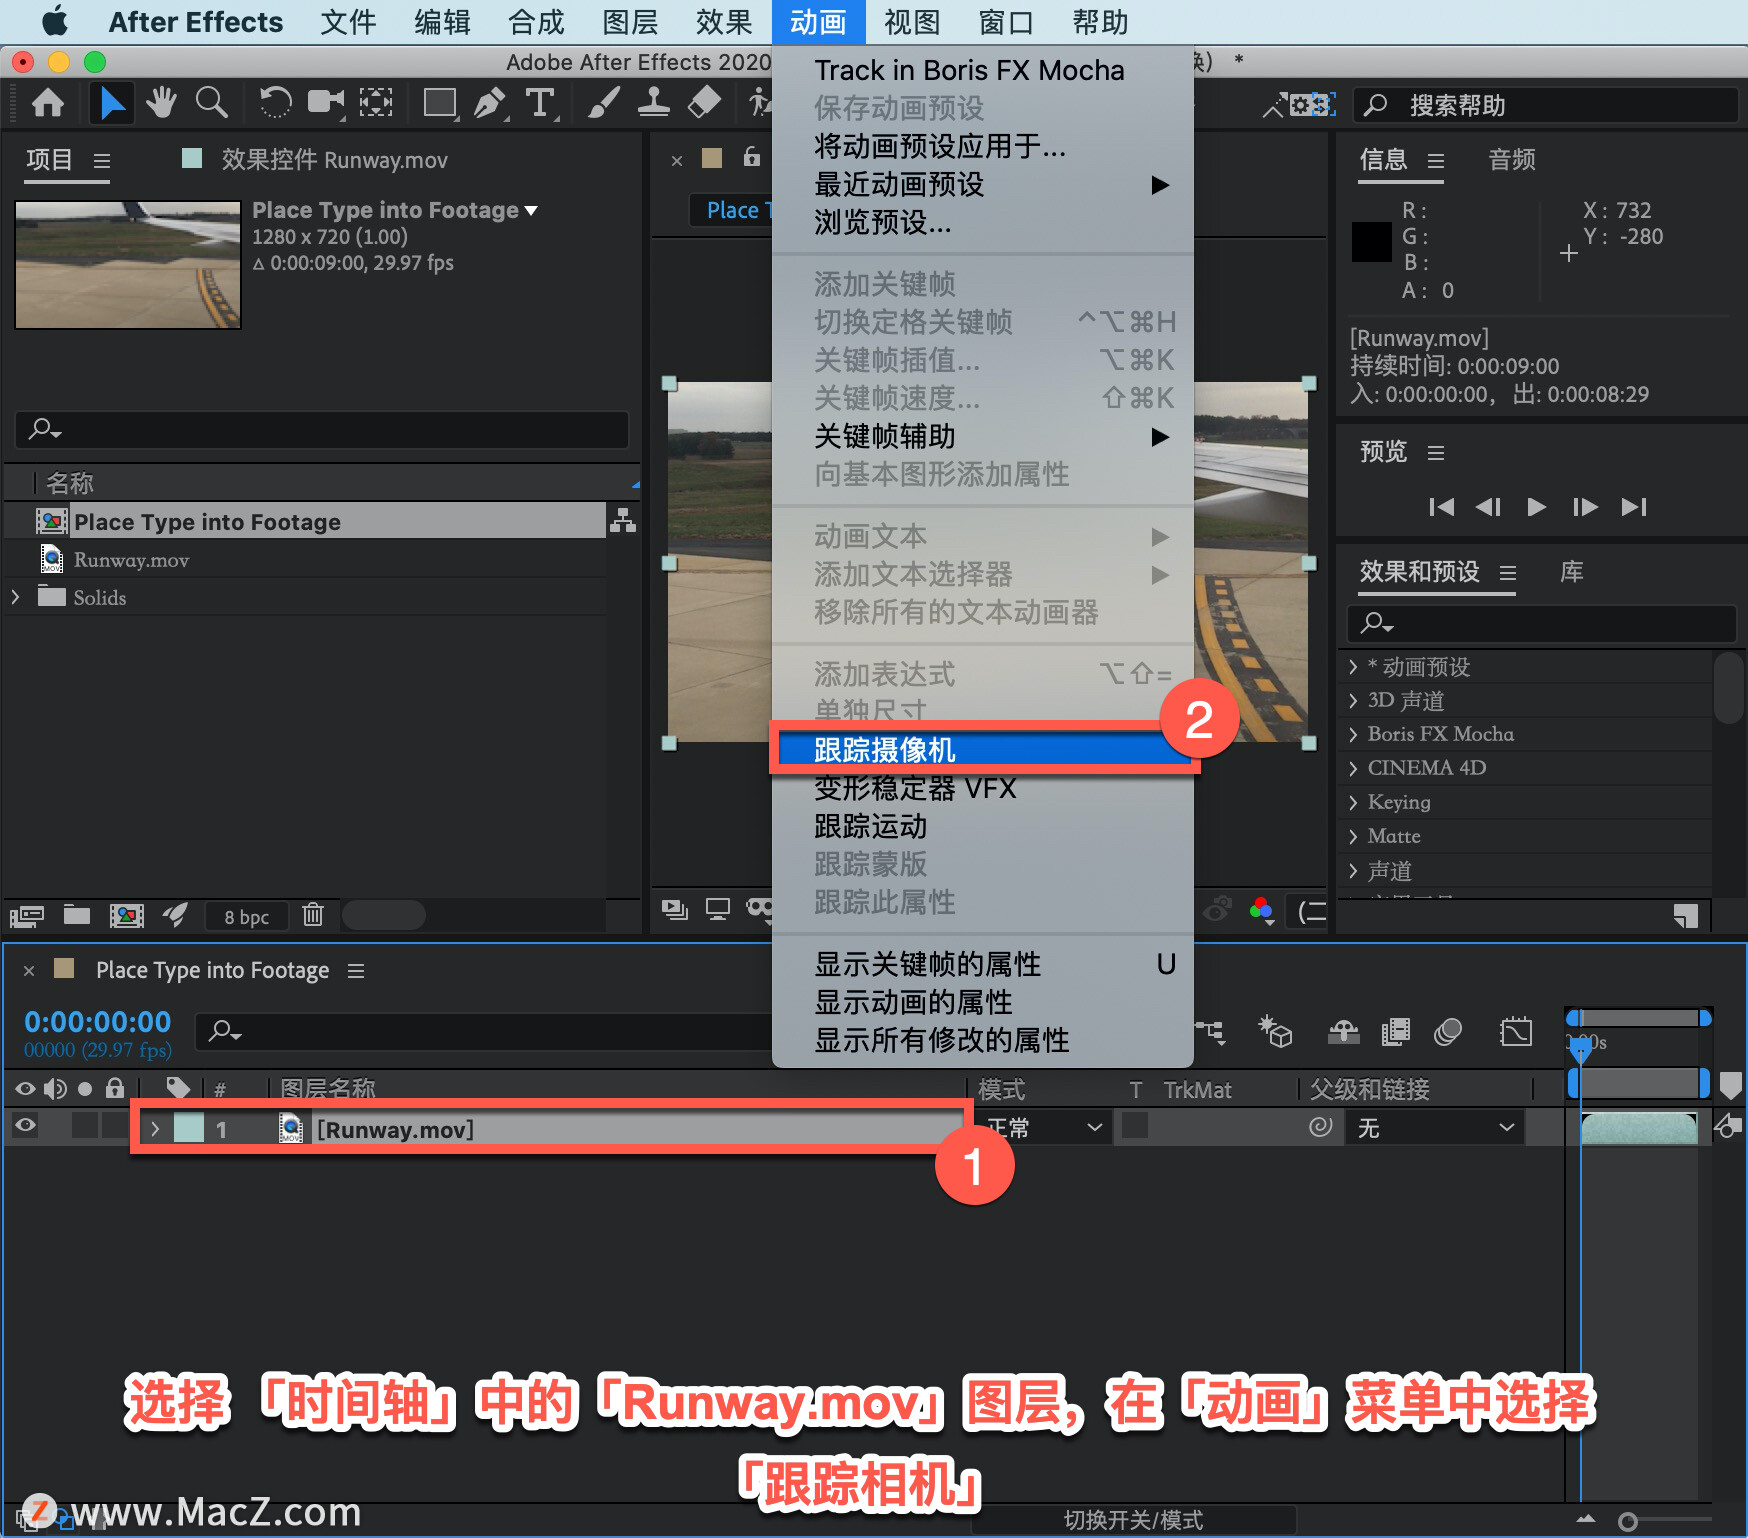 After Effects 教程「31」，如何在 After Effects 中使用3D 摄像机跟踪器效果？